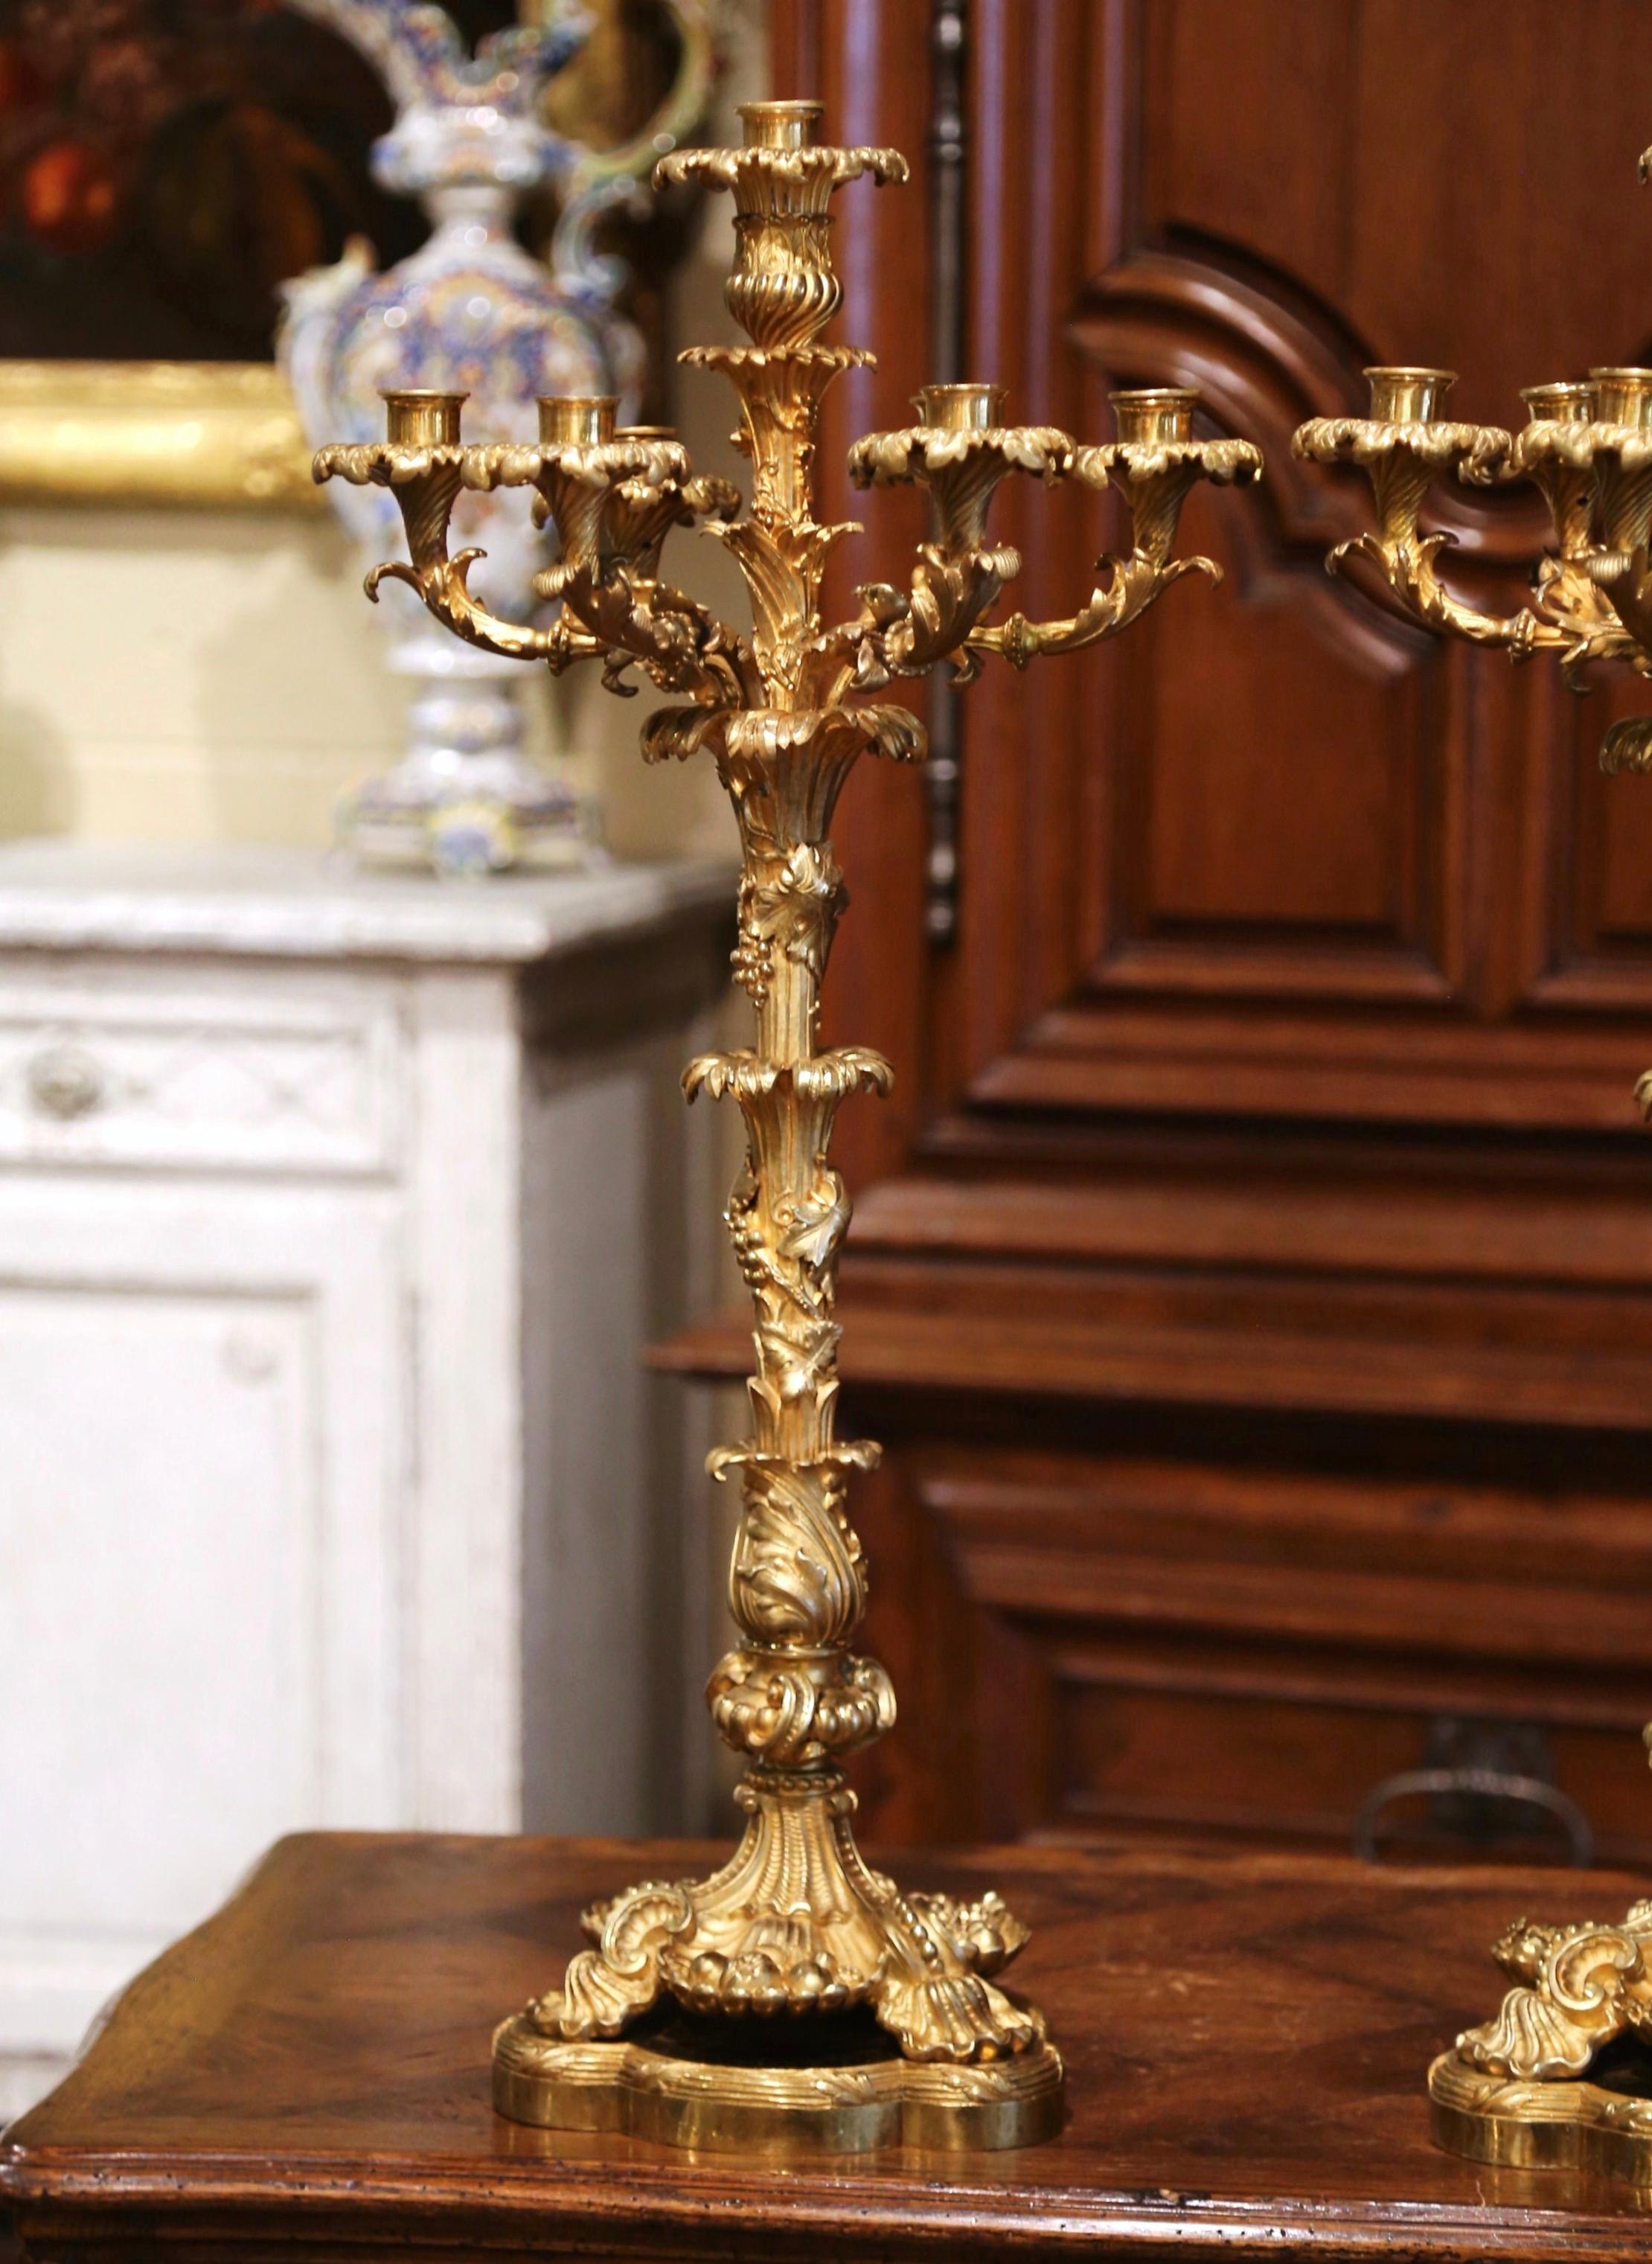 Decorate a mantel or a dining room table with this important pair of antique candle holders. Crafted in France circa 1860, each bronze dore light stands on an intricate scalloped base decorated with fruit and shell motifs. The tall center stem is